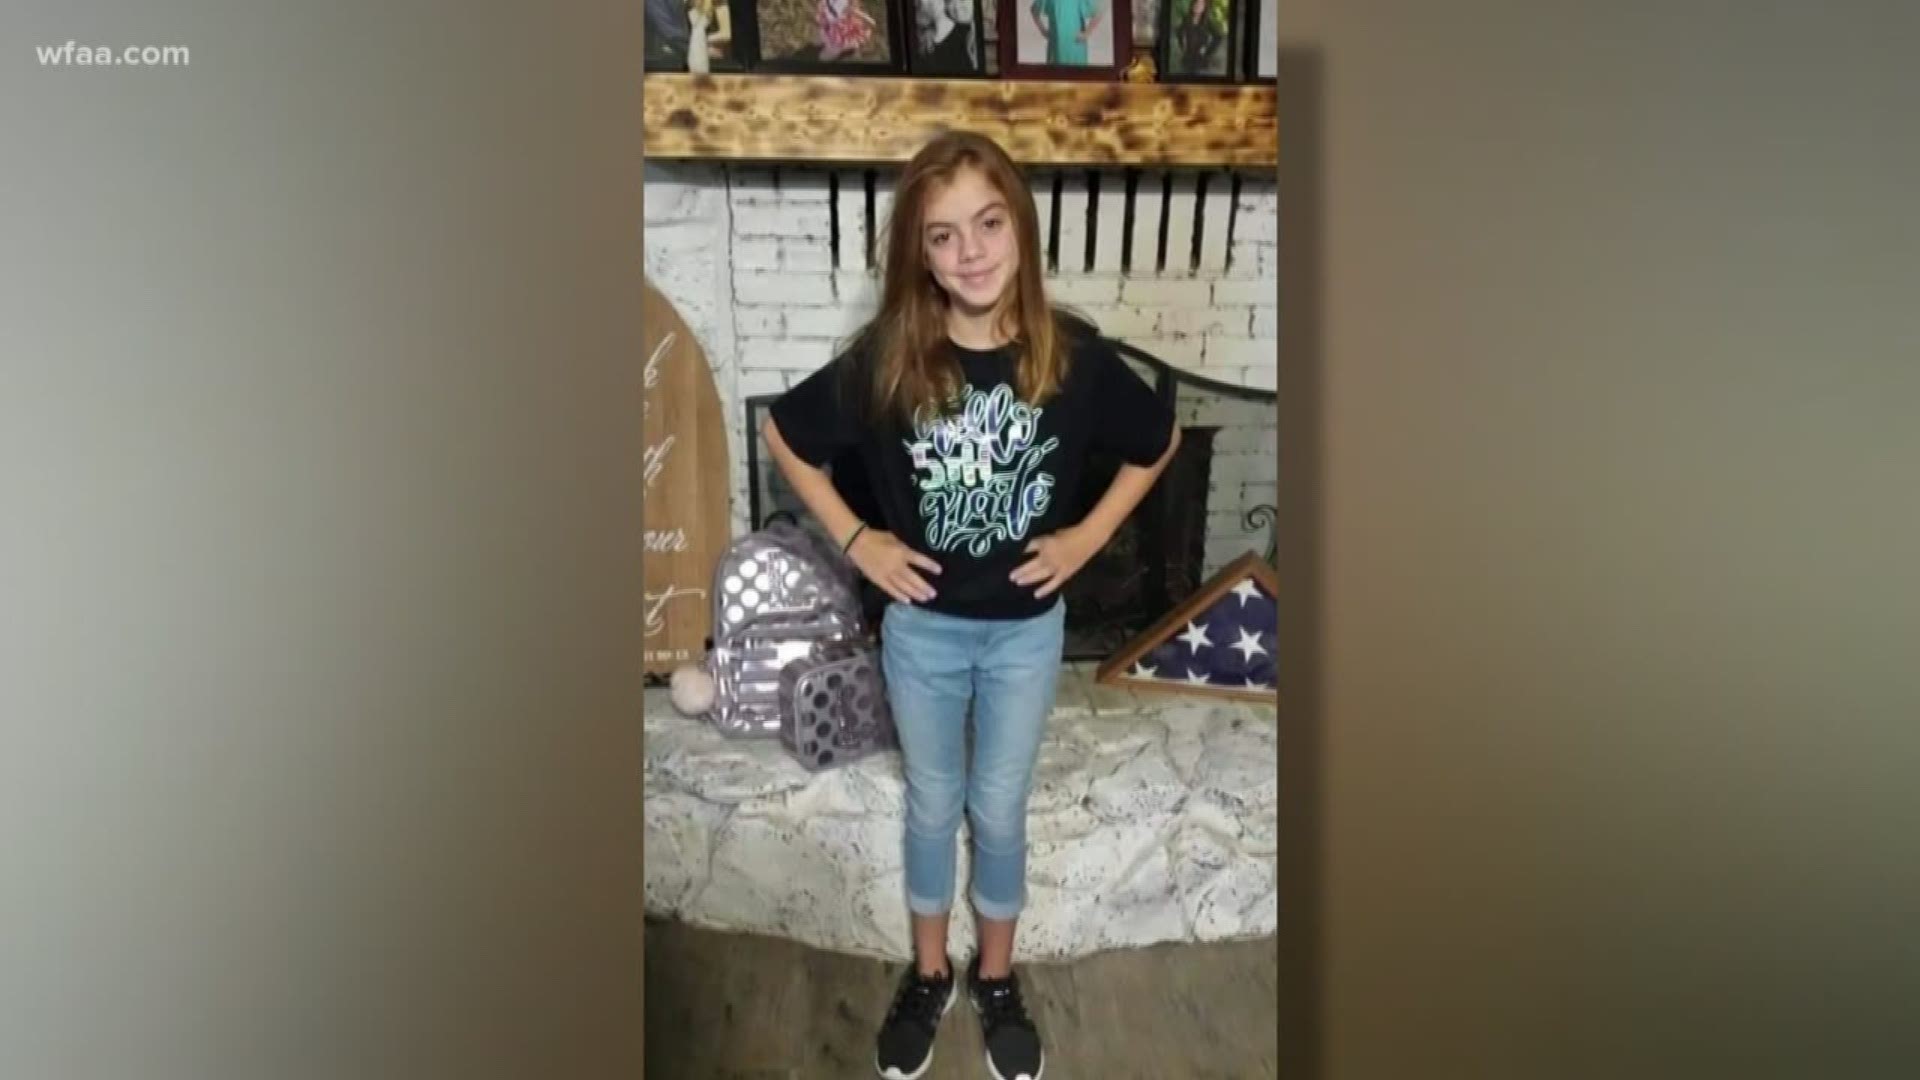 Lily Mae Avant, 10, who lives near Waco, is in a medically-induced coma at Cook Children's Medical Center in Fort Worth after contracting a brain-eating amoeba. Her family believes Lily contracted the amoeba while swimming in the Brazos River in her backyard.